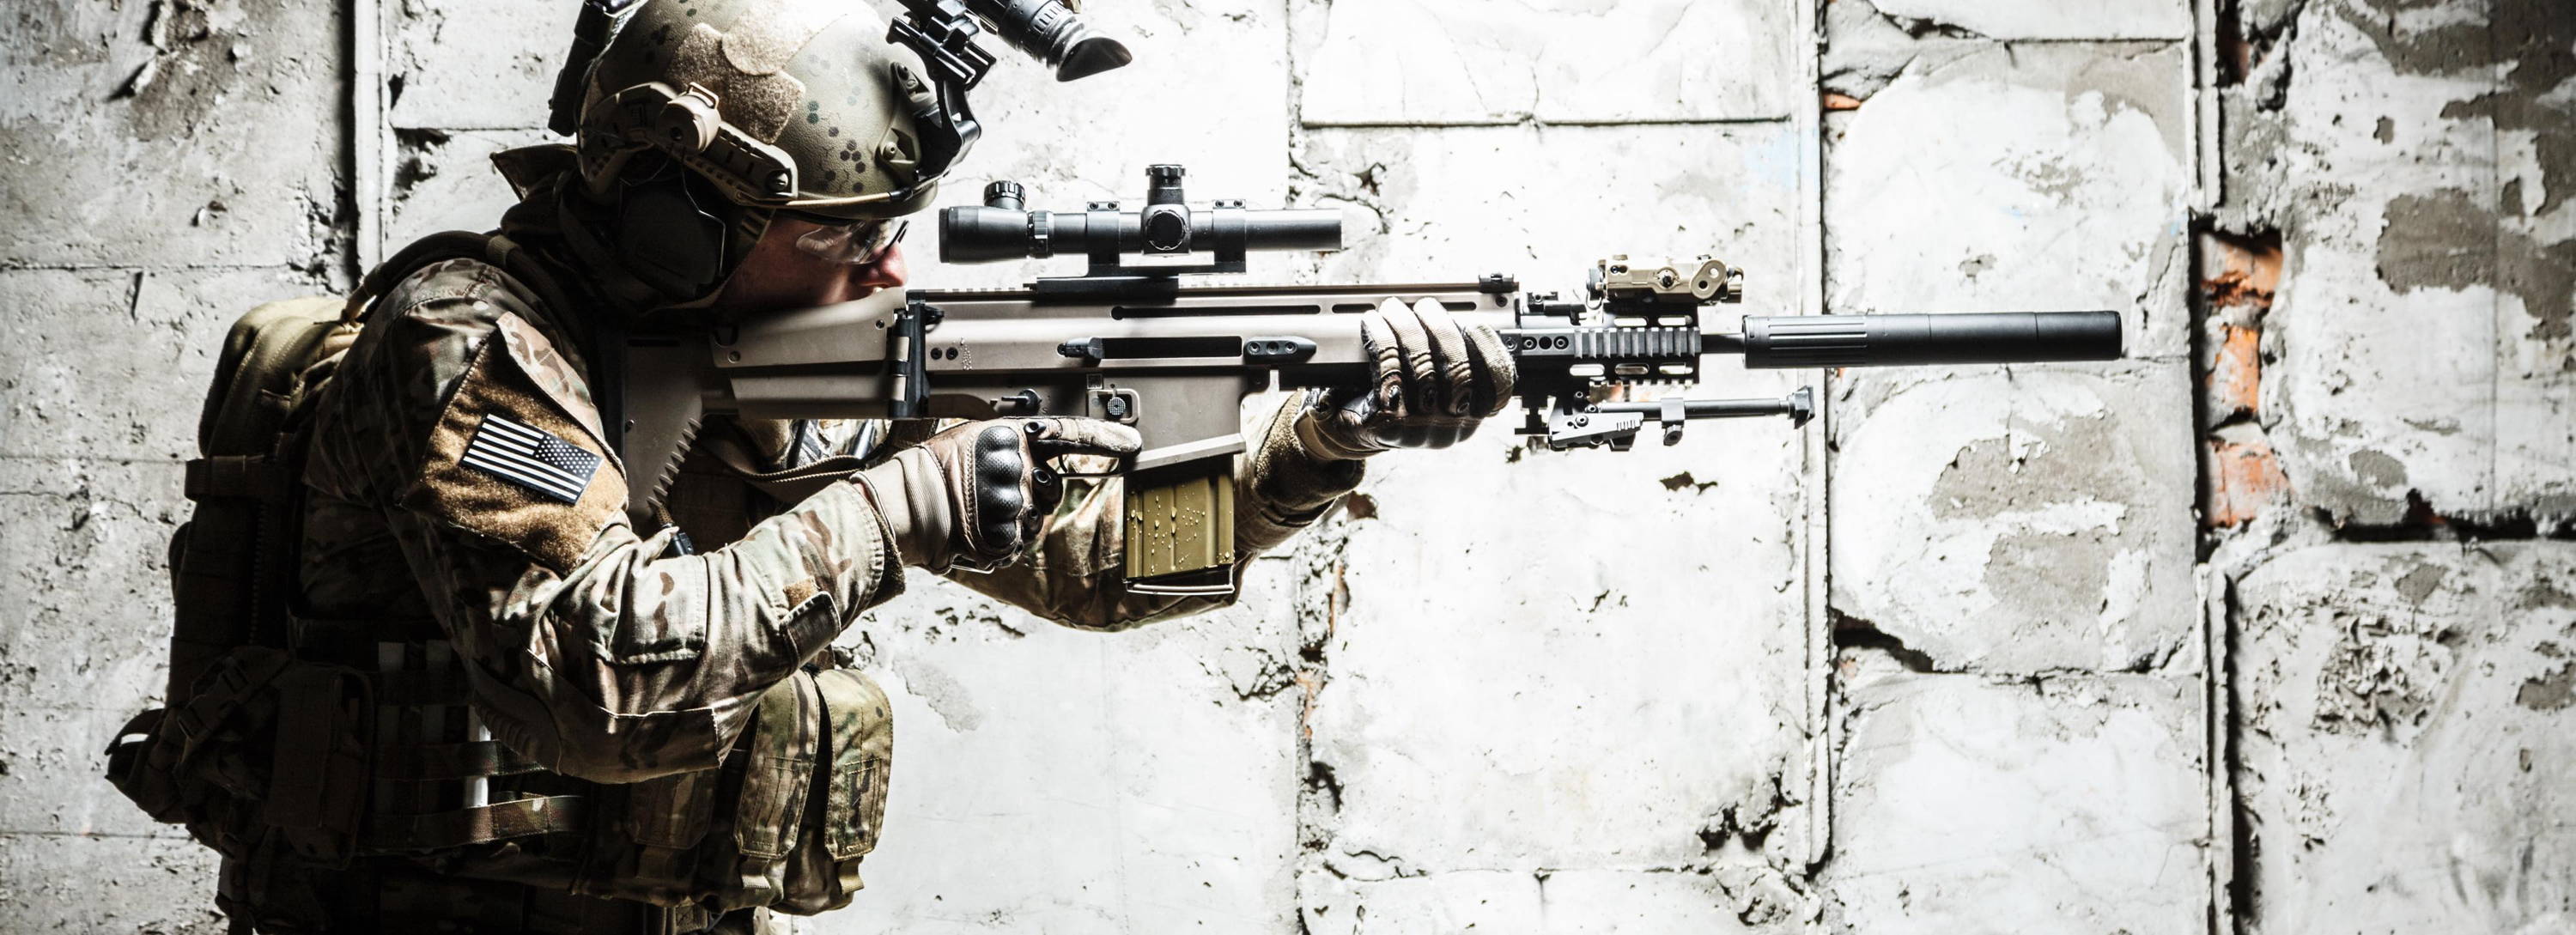 Army Ranger Pointing AR-15 Wearing a Plate Carrier